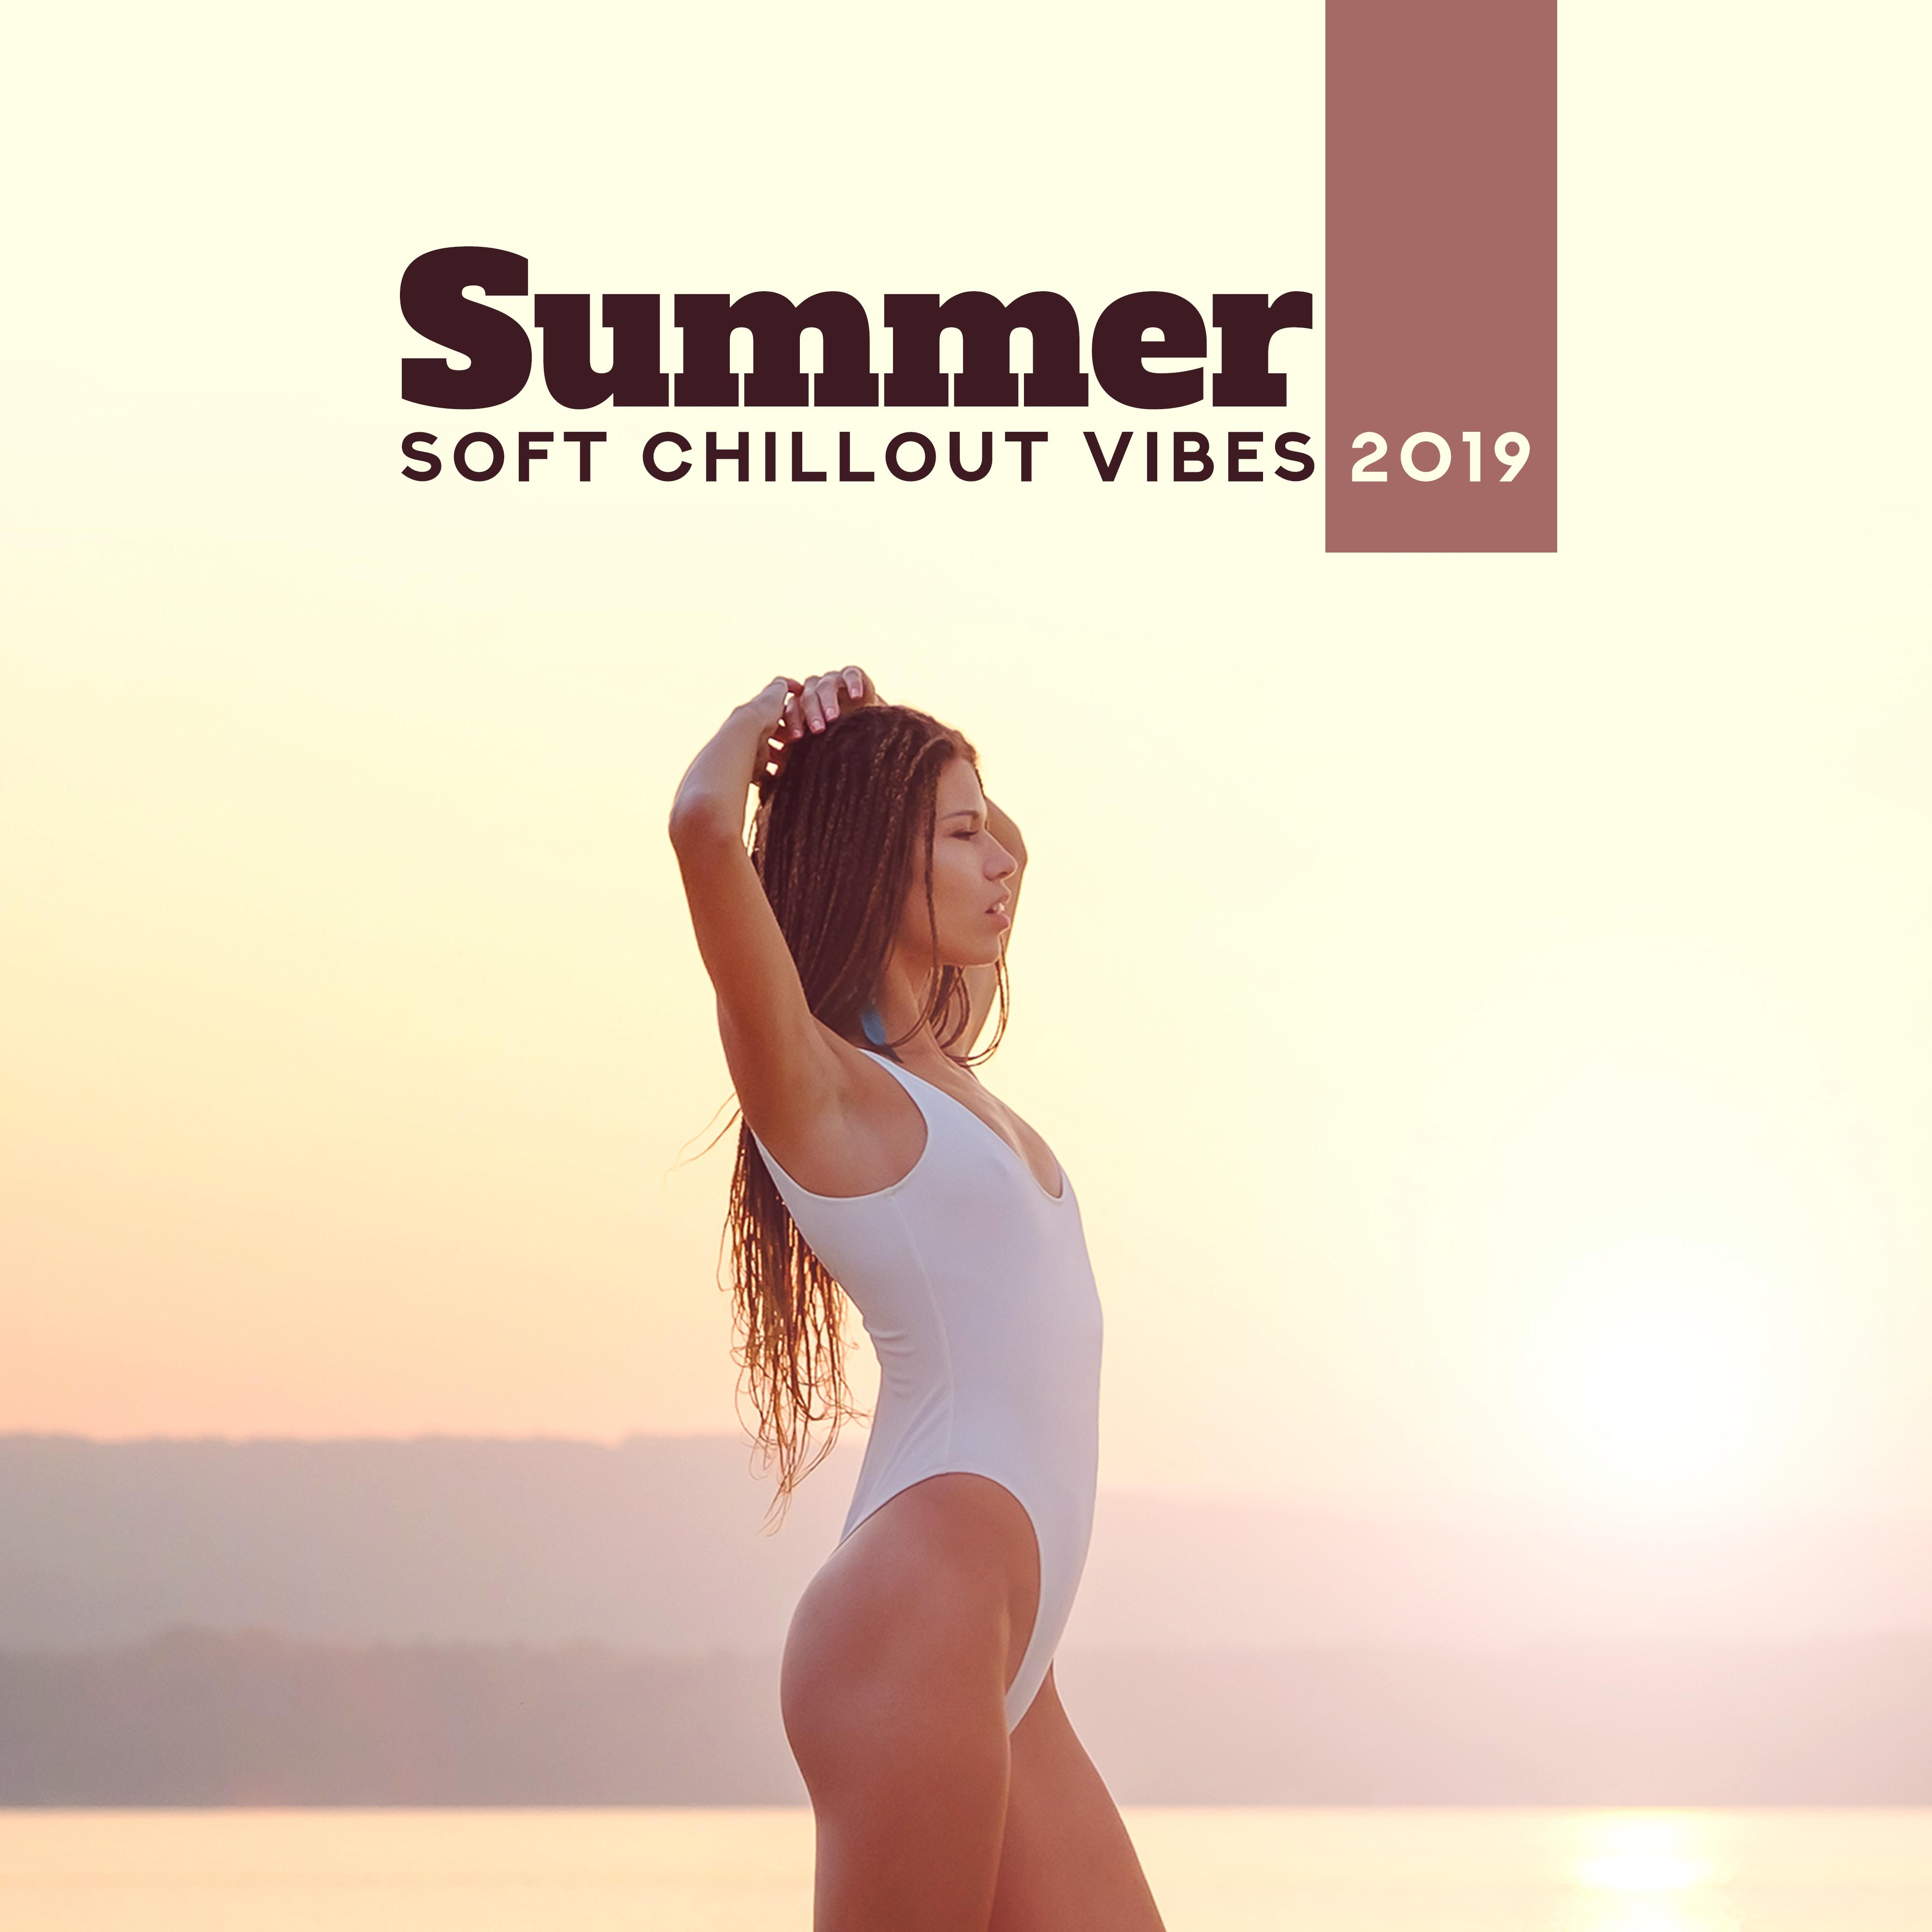 Summer Soft Chillout Vibes 2019  15 Relaxing Tracks, Poolside or Beach Calming, Hot Days Full of Sun